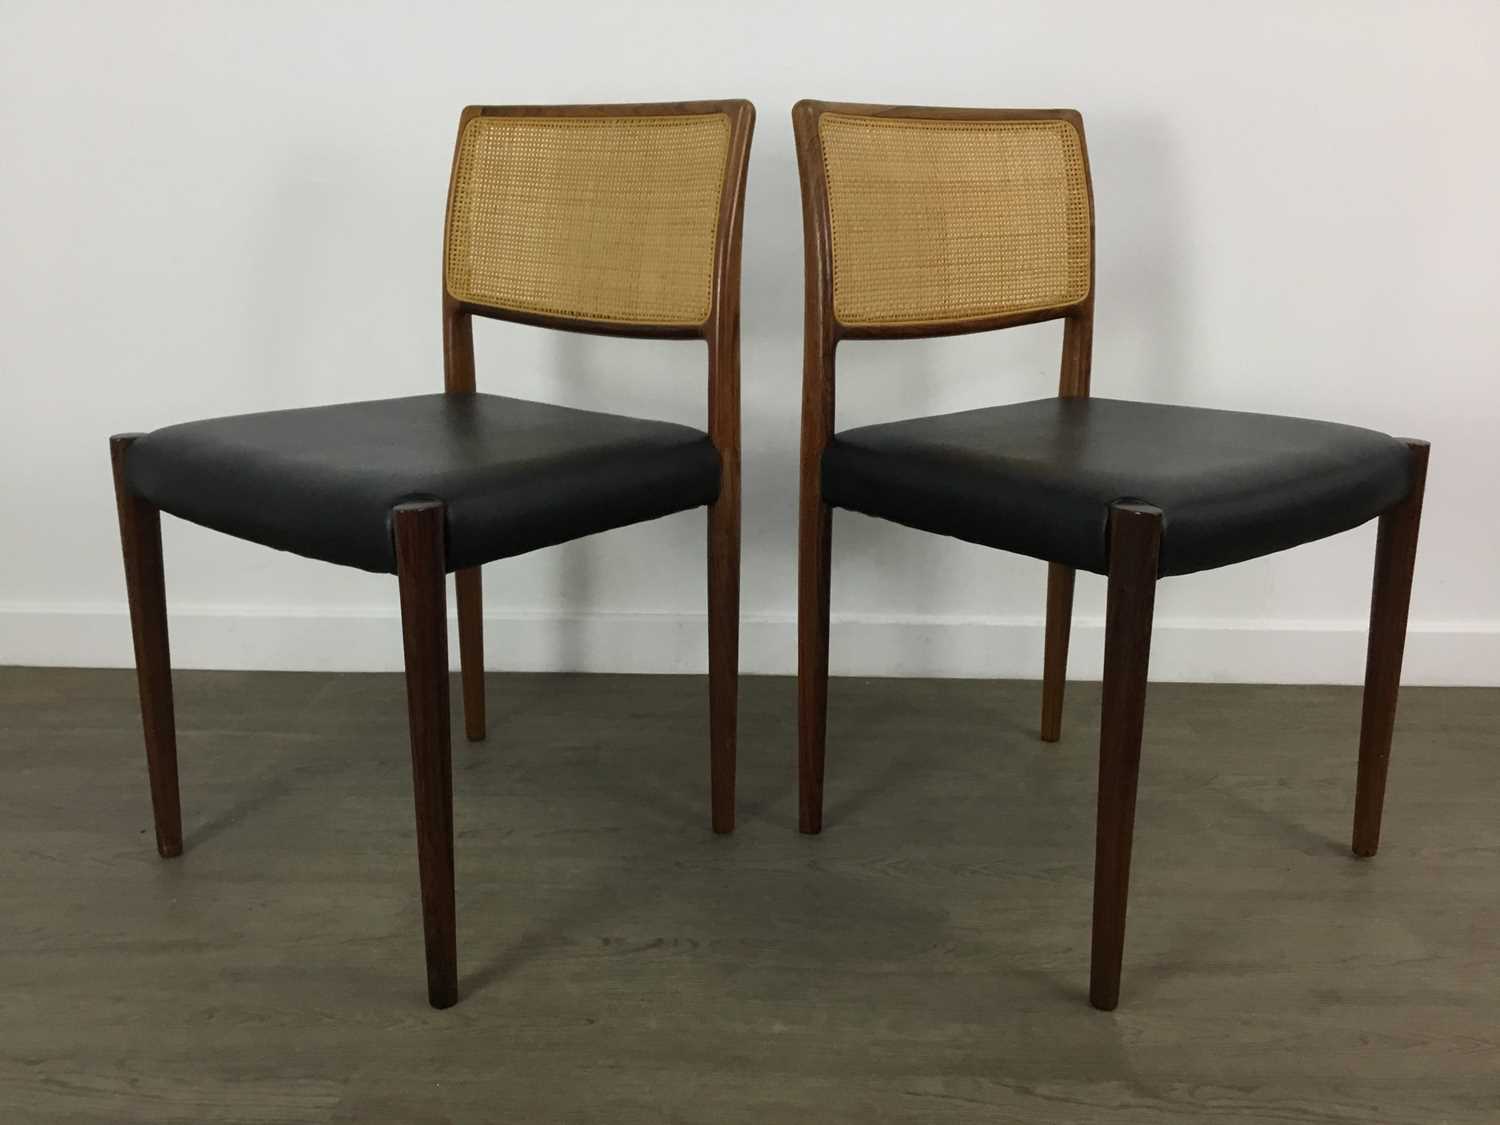 ATTRIBUTED TO SKARABORGS MOBELINDUSTRI TIBRO, SET OF EIGHT ROSEWOOD DINING CHAIRS, CIRCA 1960-69 - Image 3 of 3